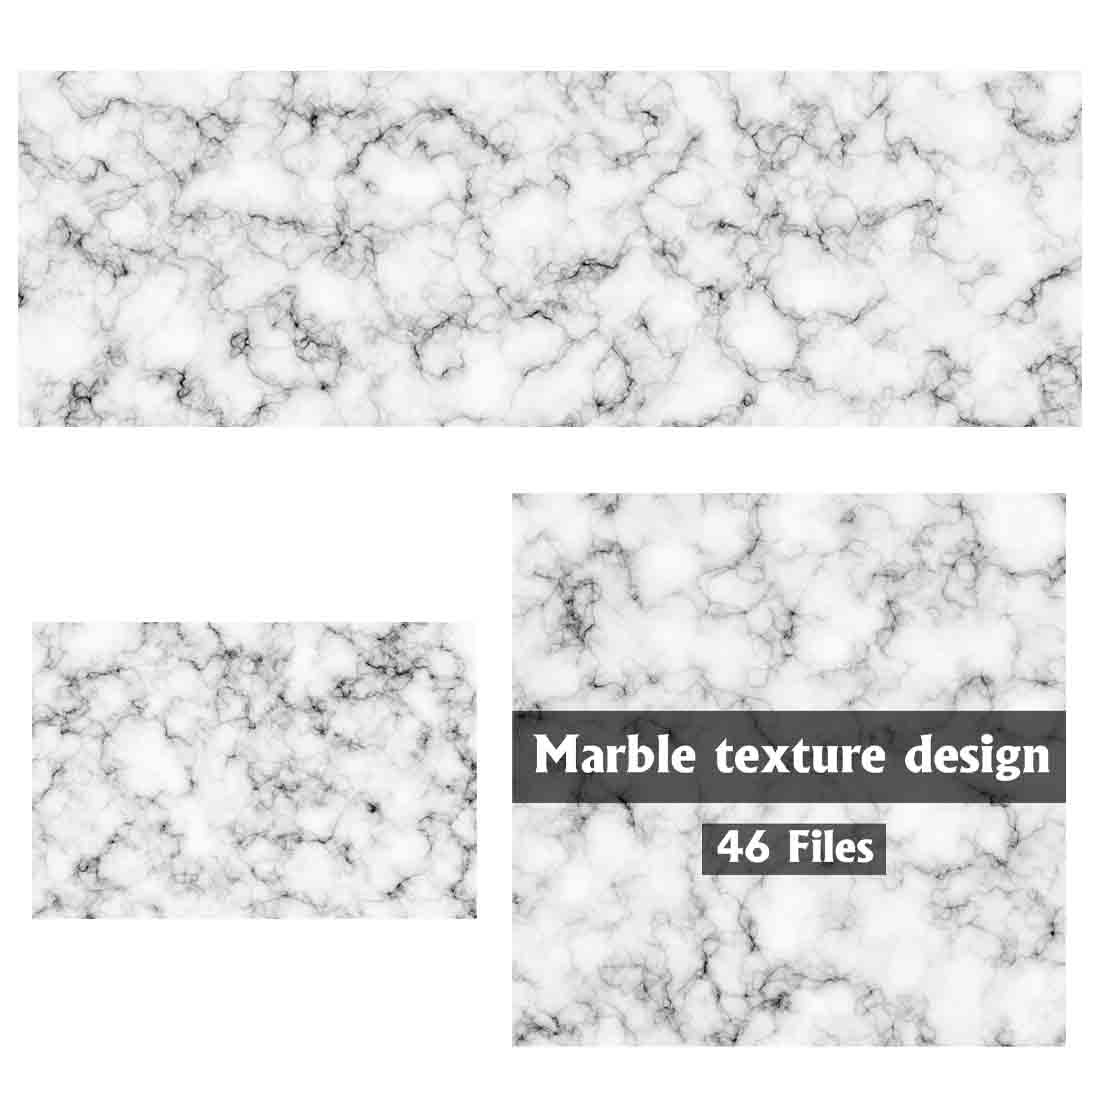 Marble texture design preview image.